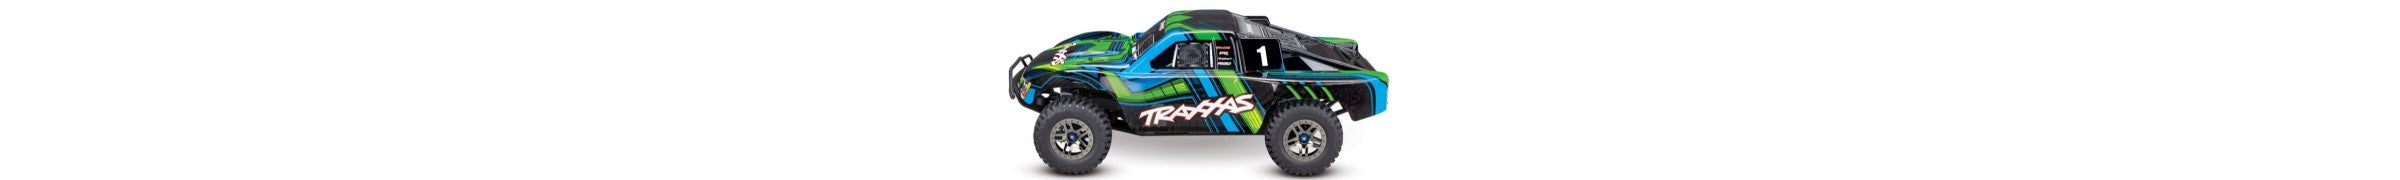 Parts For 68077-4 Traxxas Slash Ultimate 4X4 1/10 4WD Brushless Short Course Racing Truck